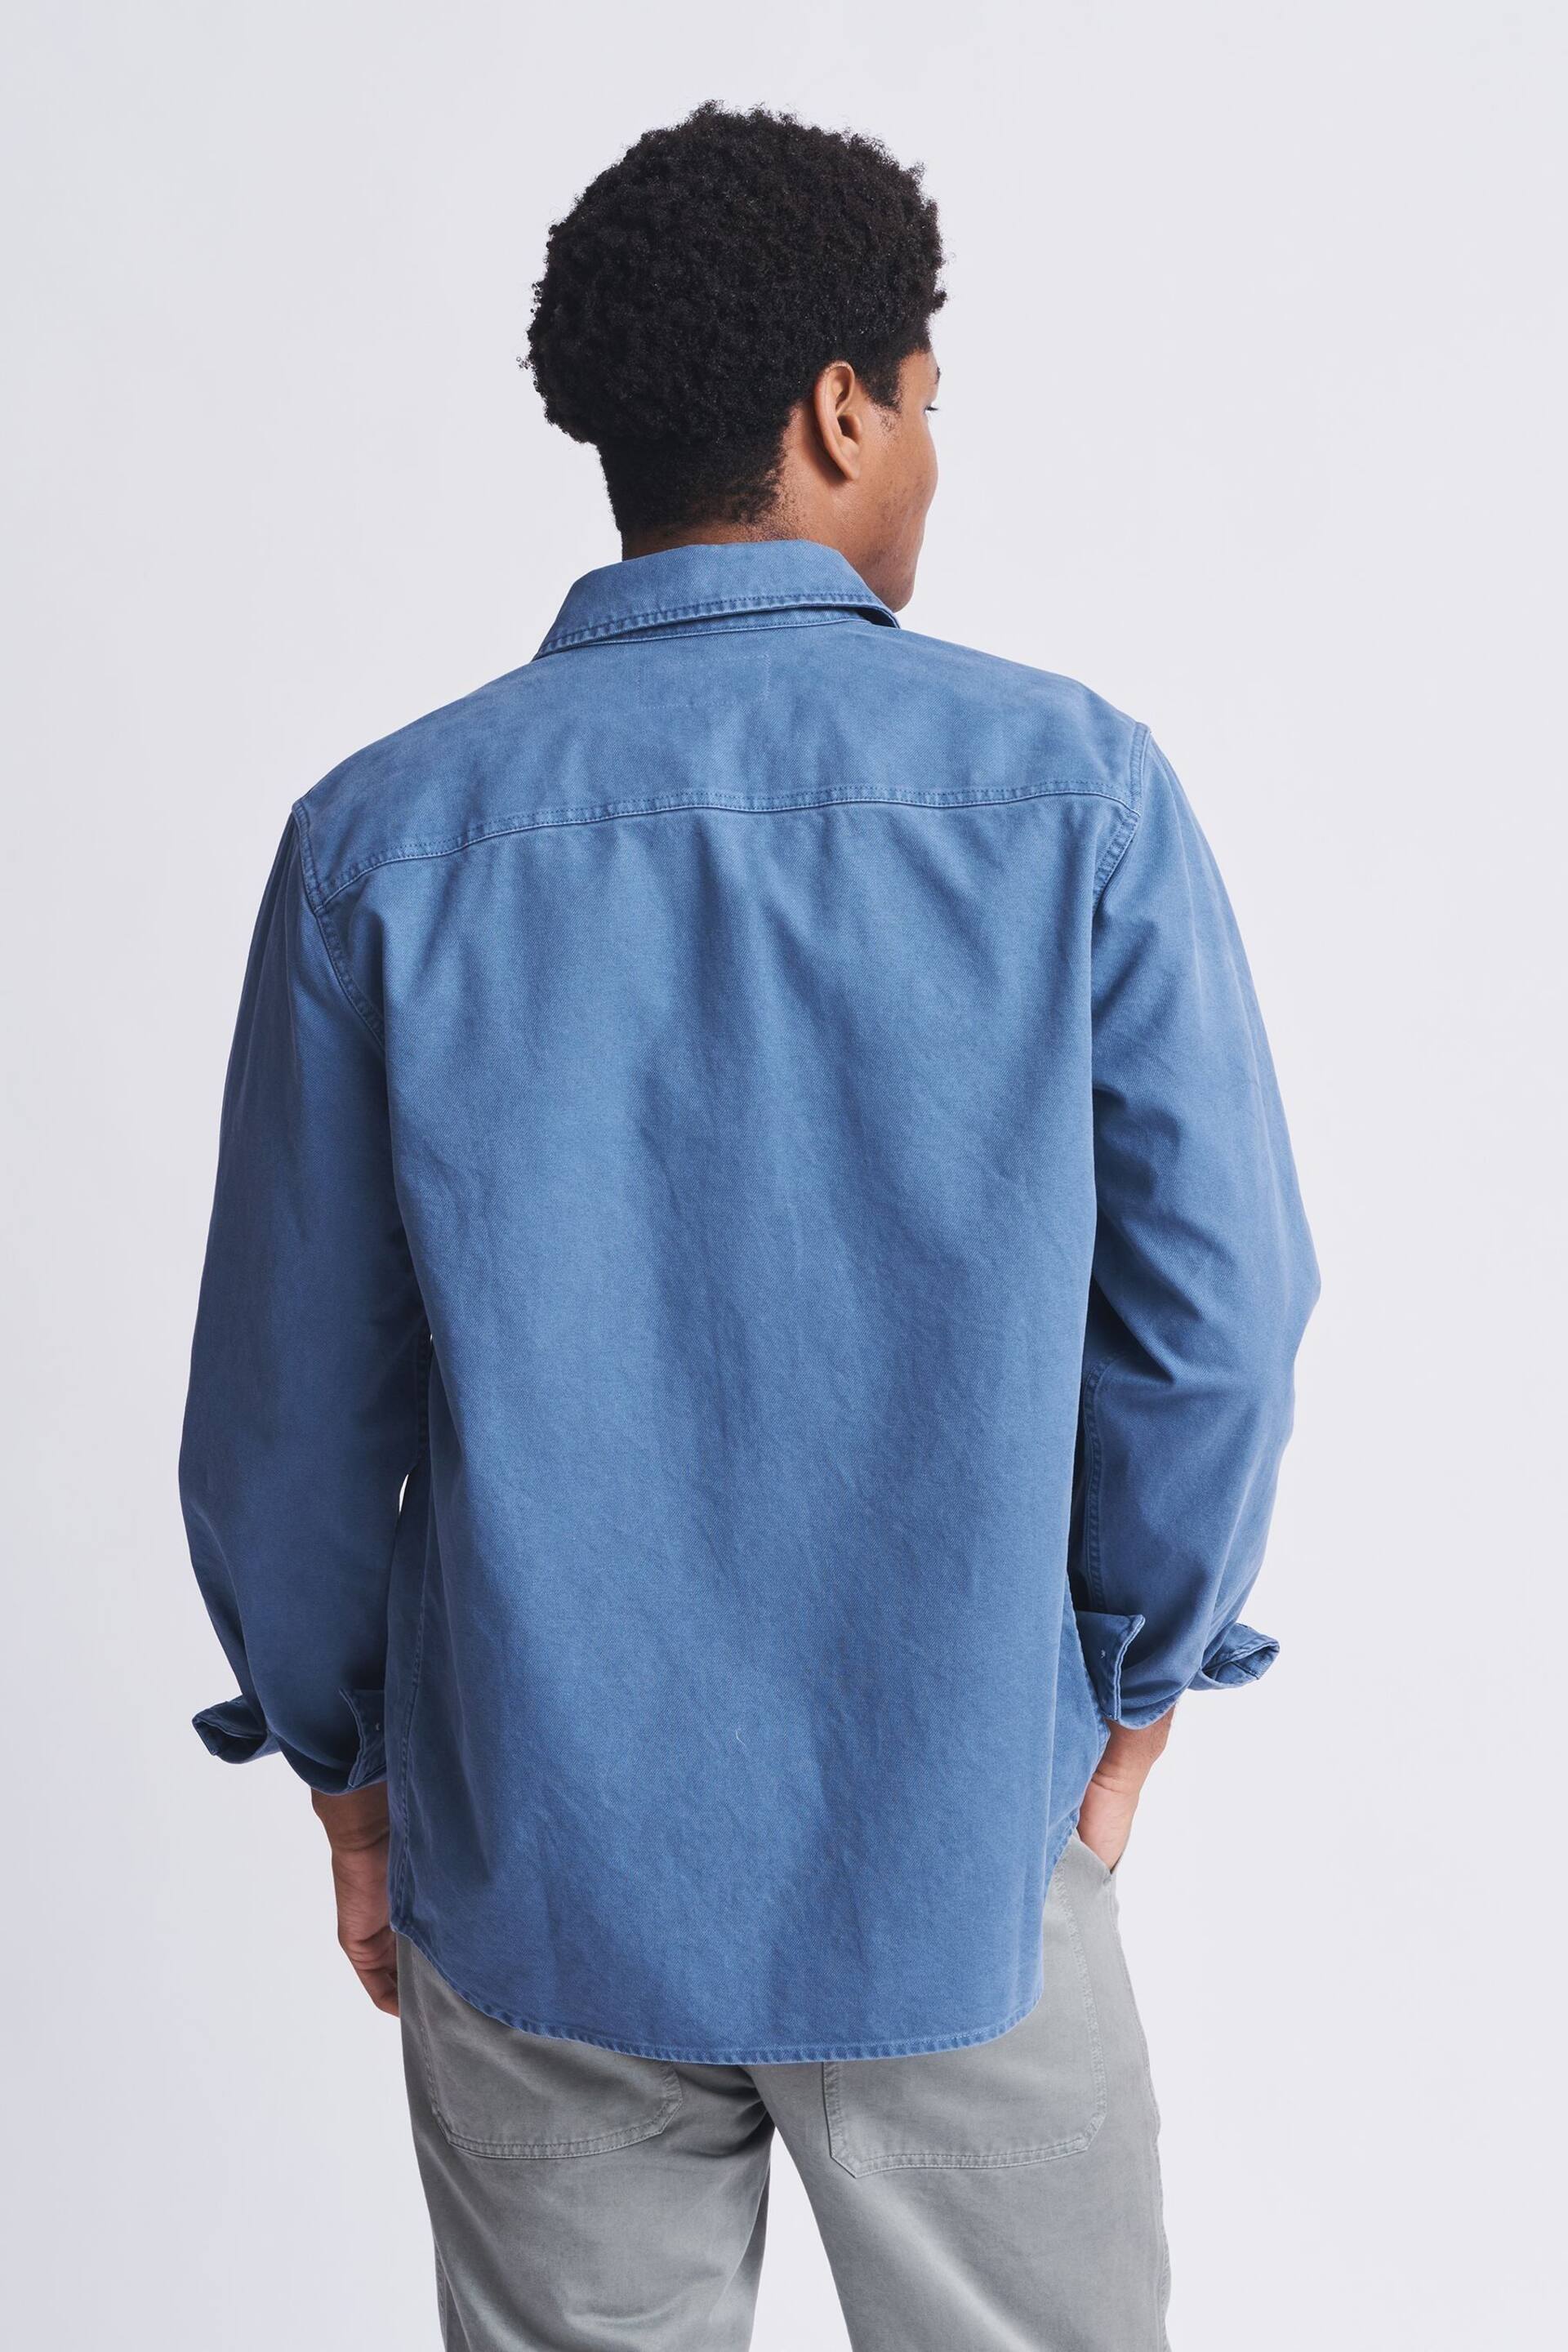 Aubin Blue Dovedale Cotton Twill Overshirt - Image 2 of 7